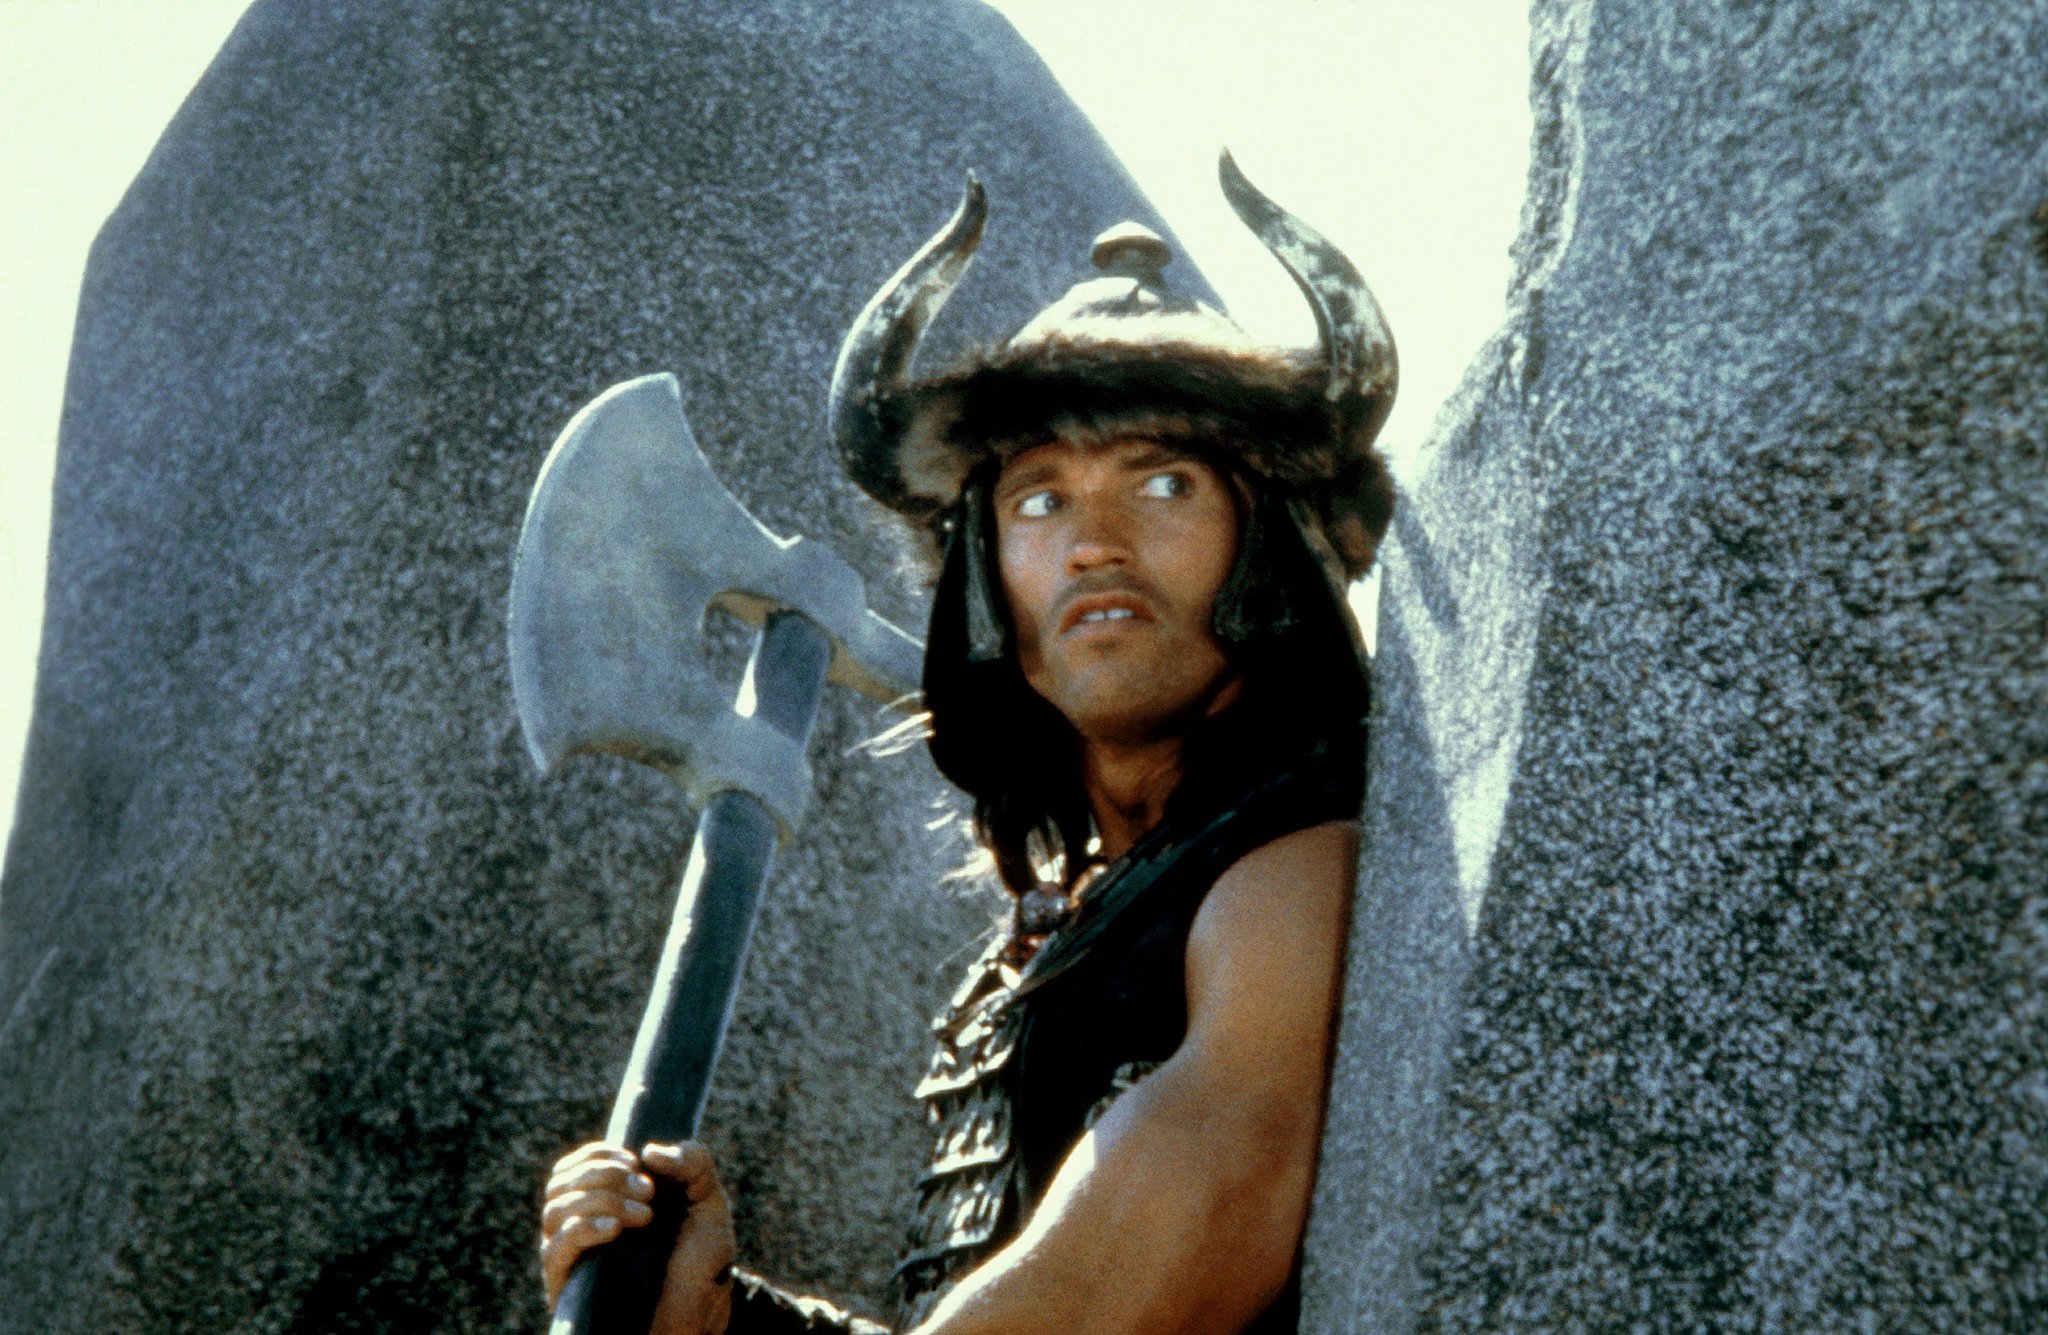 Still from 1982 film Conan in which the main character awaits a phalanx of attackers